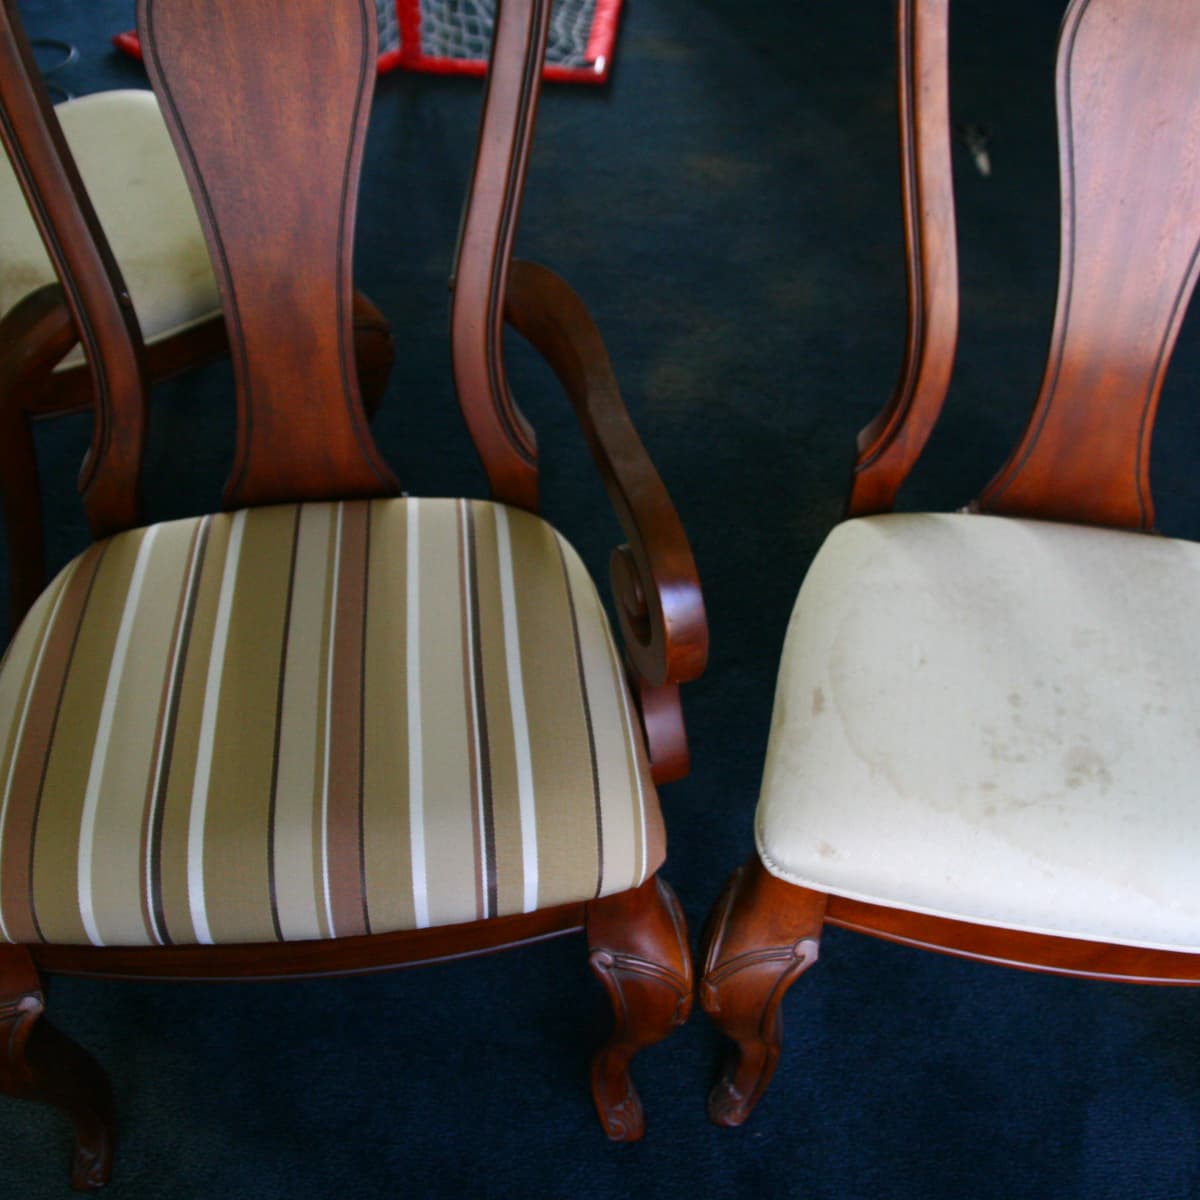 How To Reupholster A Dining Room Chair, How Much Does It Cost To Reupholster A Leather Recliner